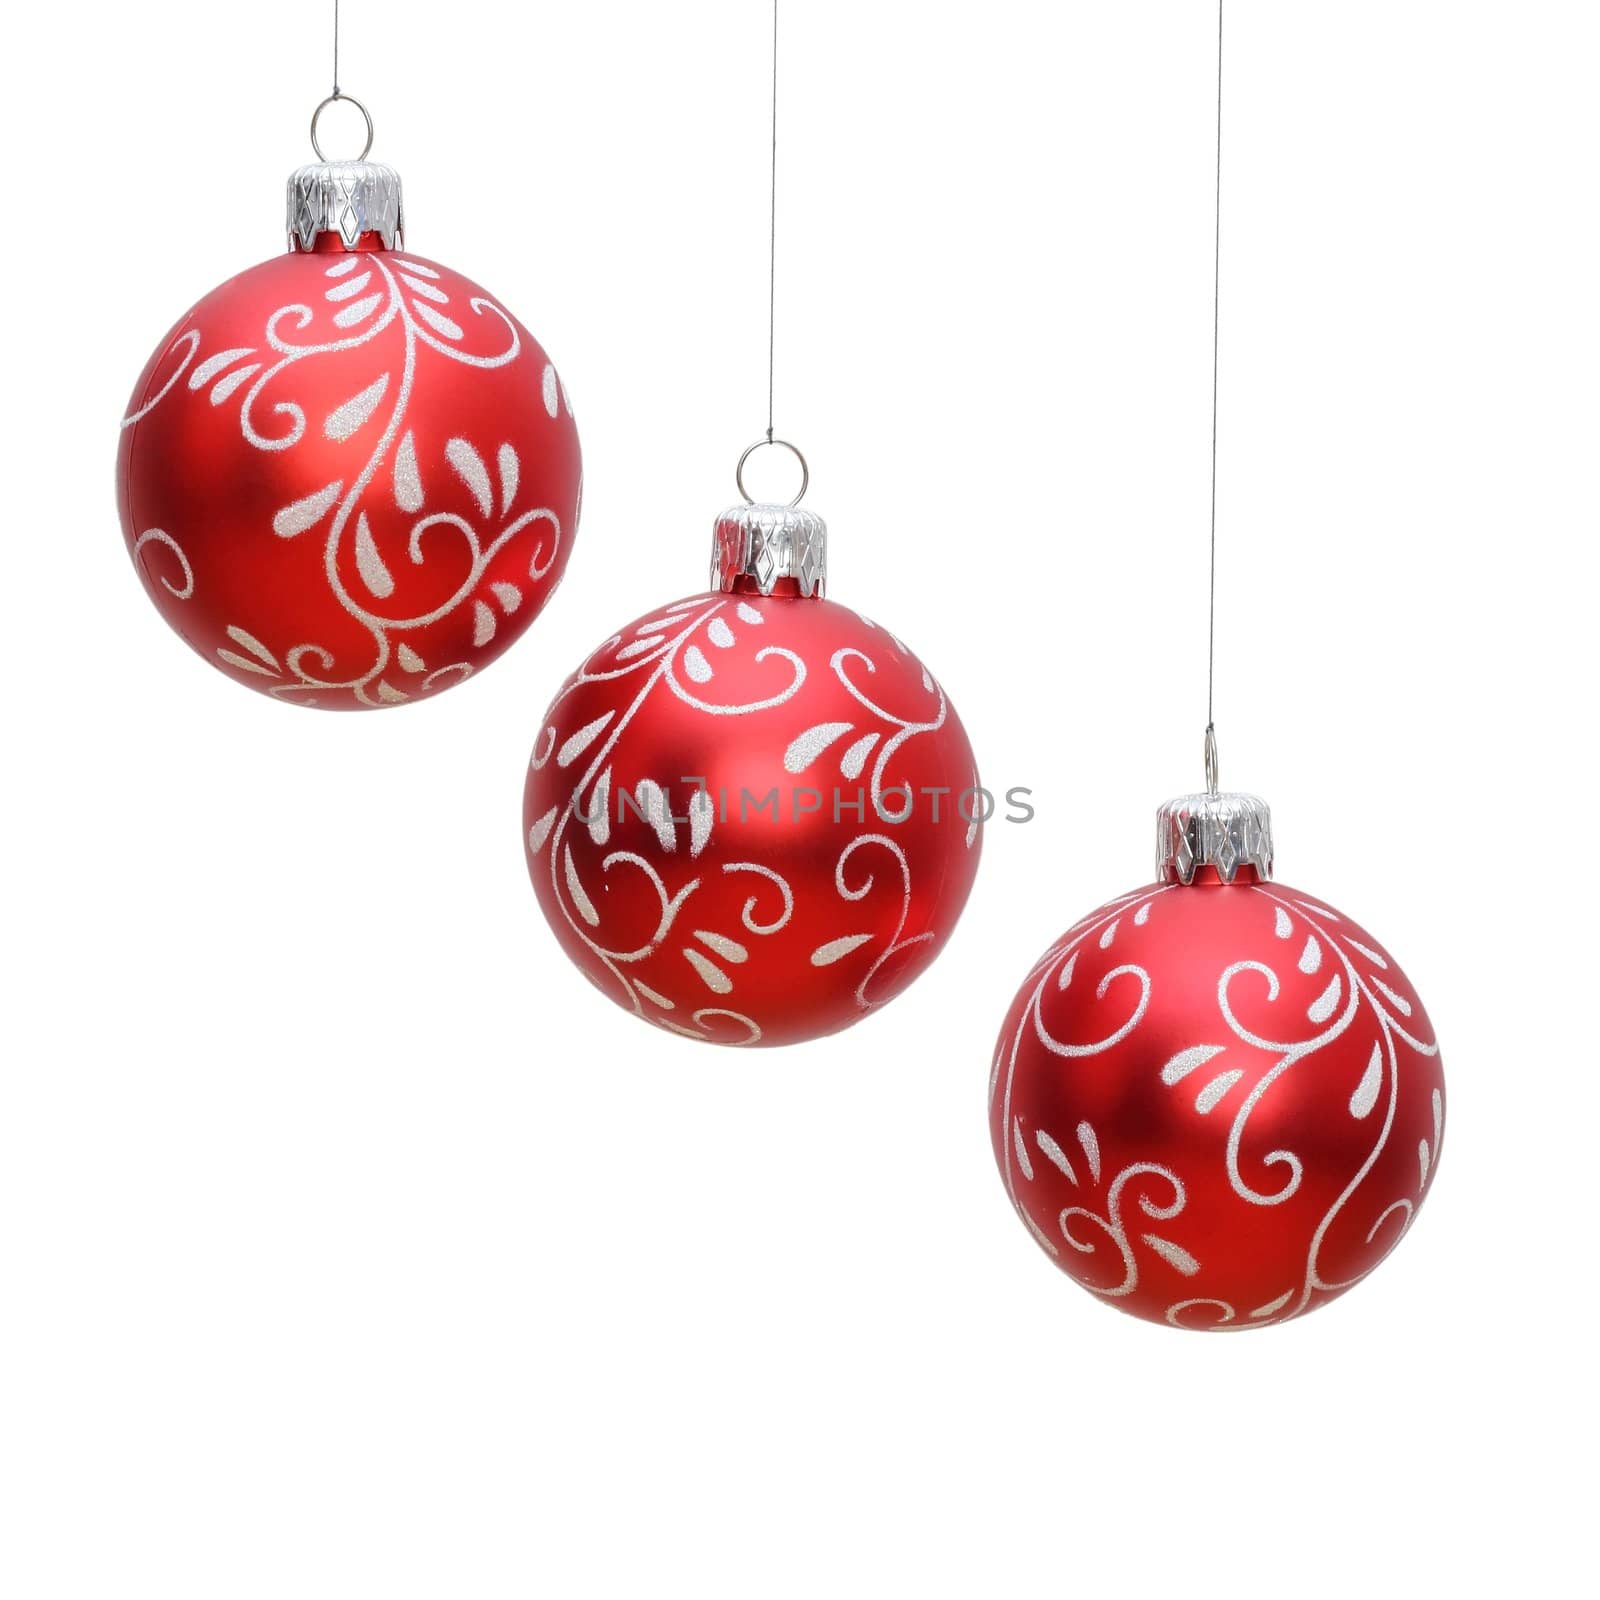 three hanging red christmas balls isolated over white background